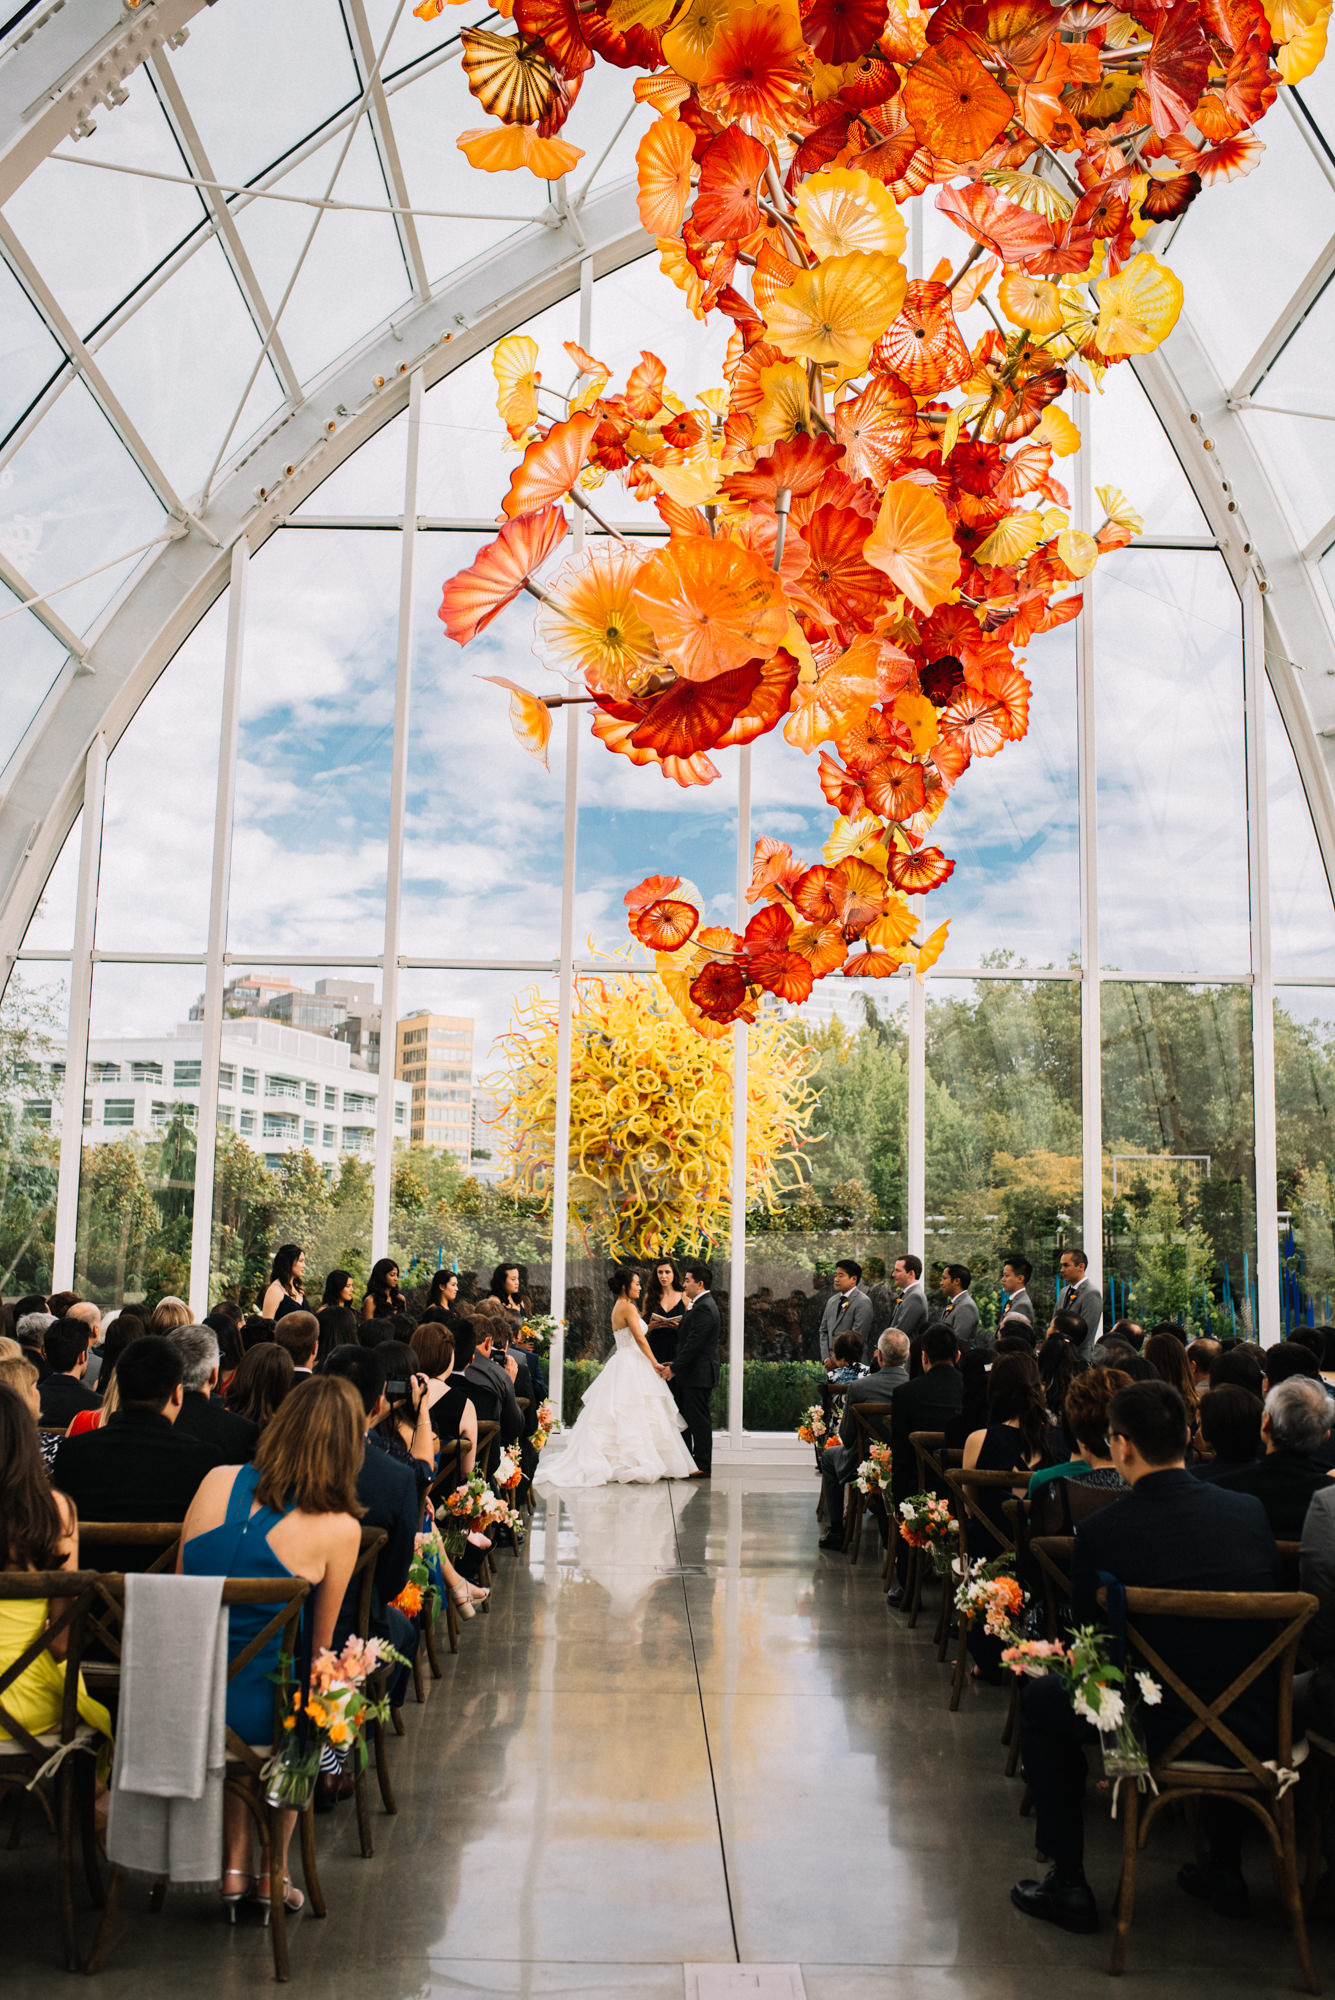 Amy and Jeremy's wedding ceremony at Chihuly Garden and Glass